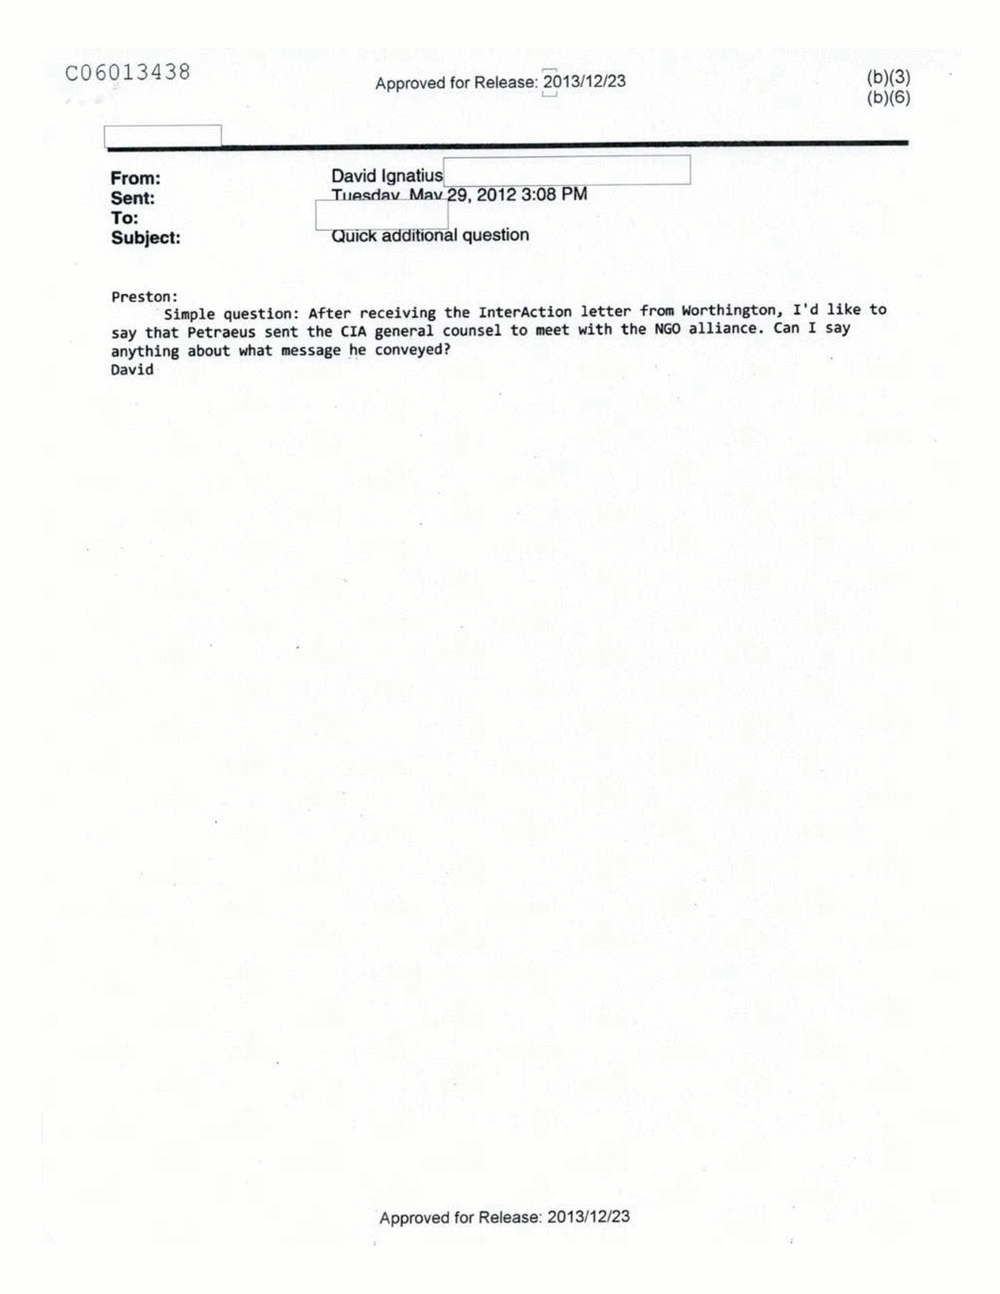 Page 301 from Email Correspondence Between Reporters and CIA Flacks